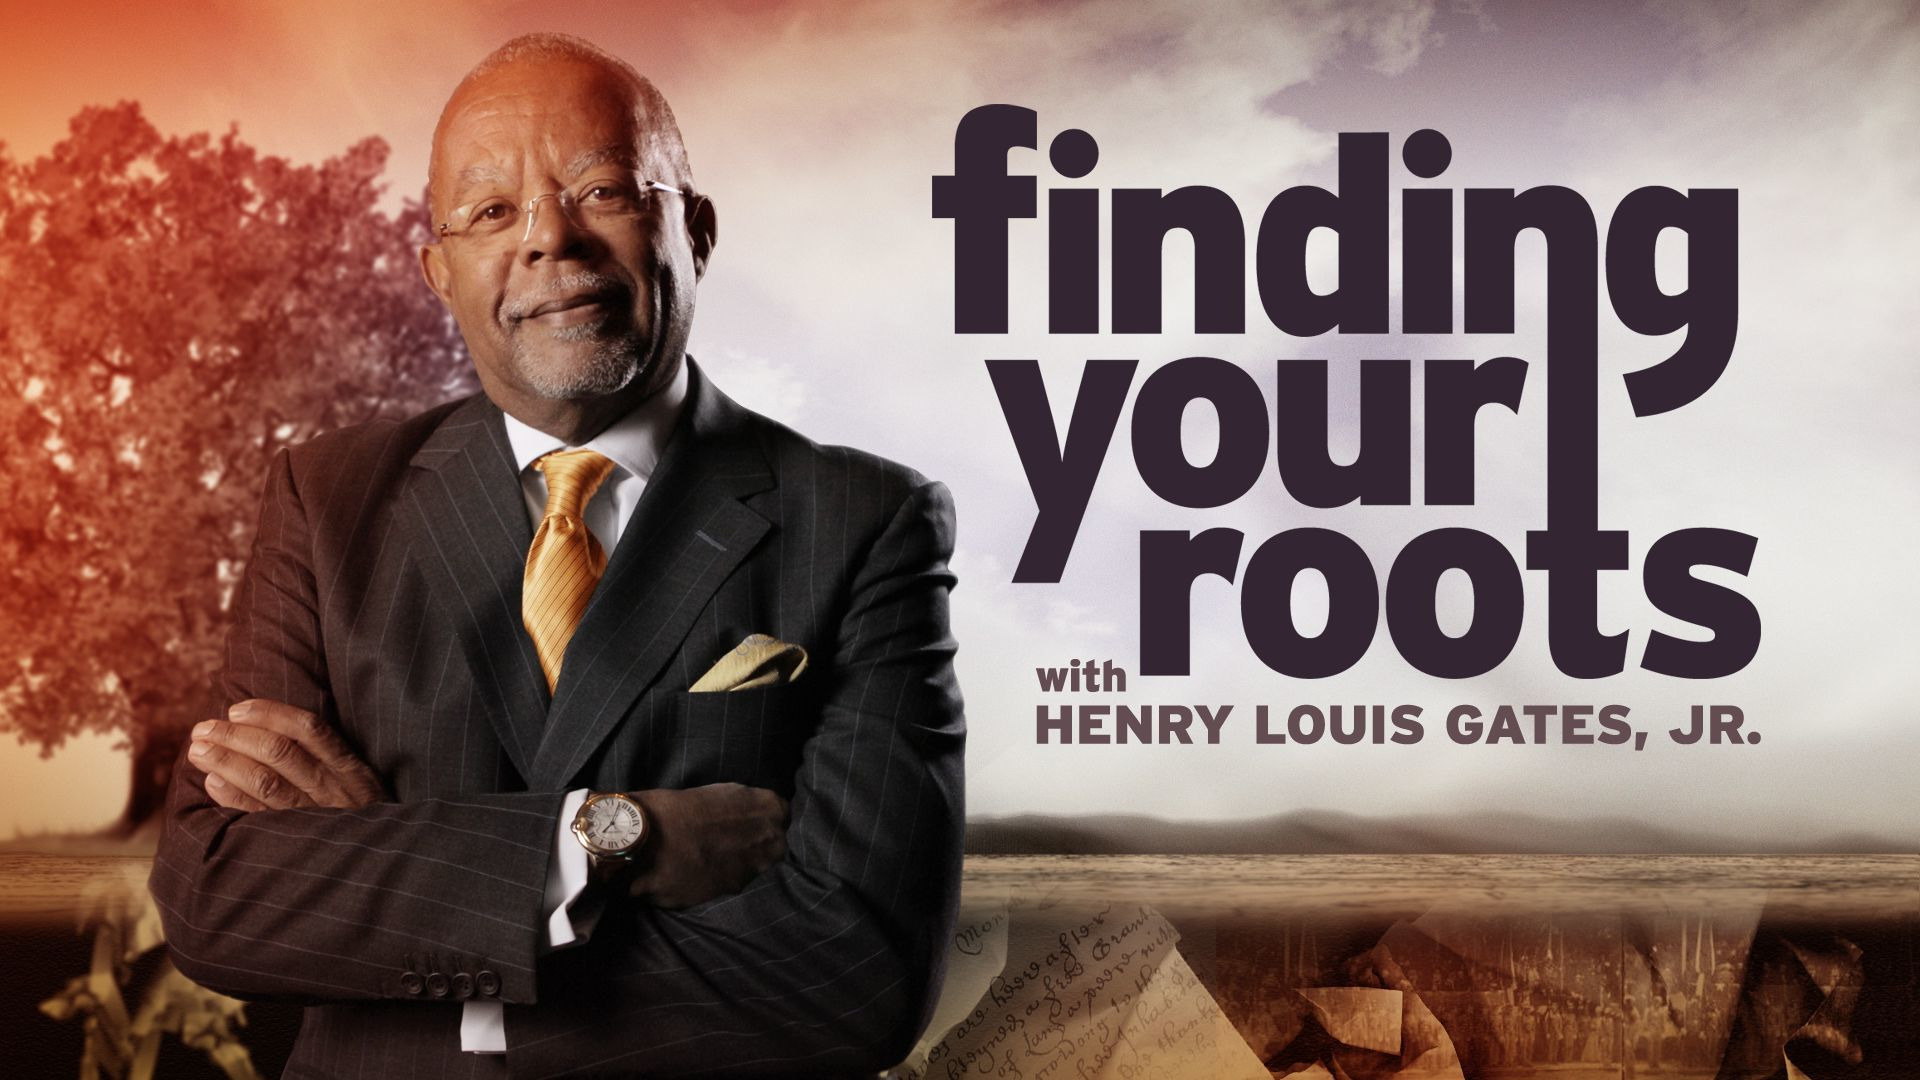 Show Finding Your Roots with Henry Louis Gates Jr.